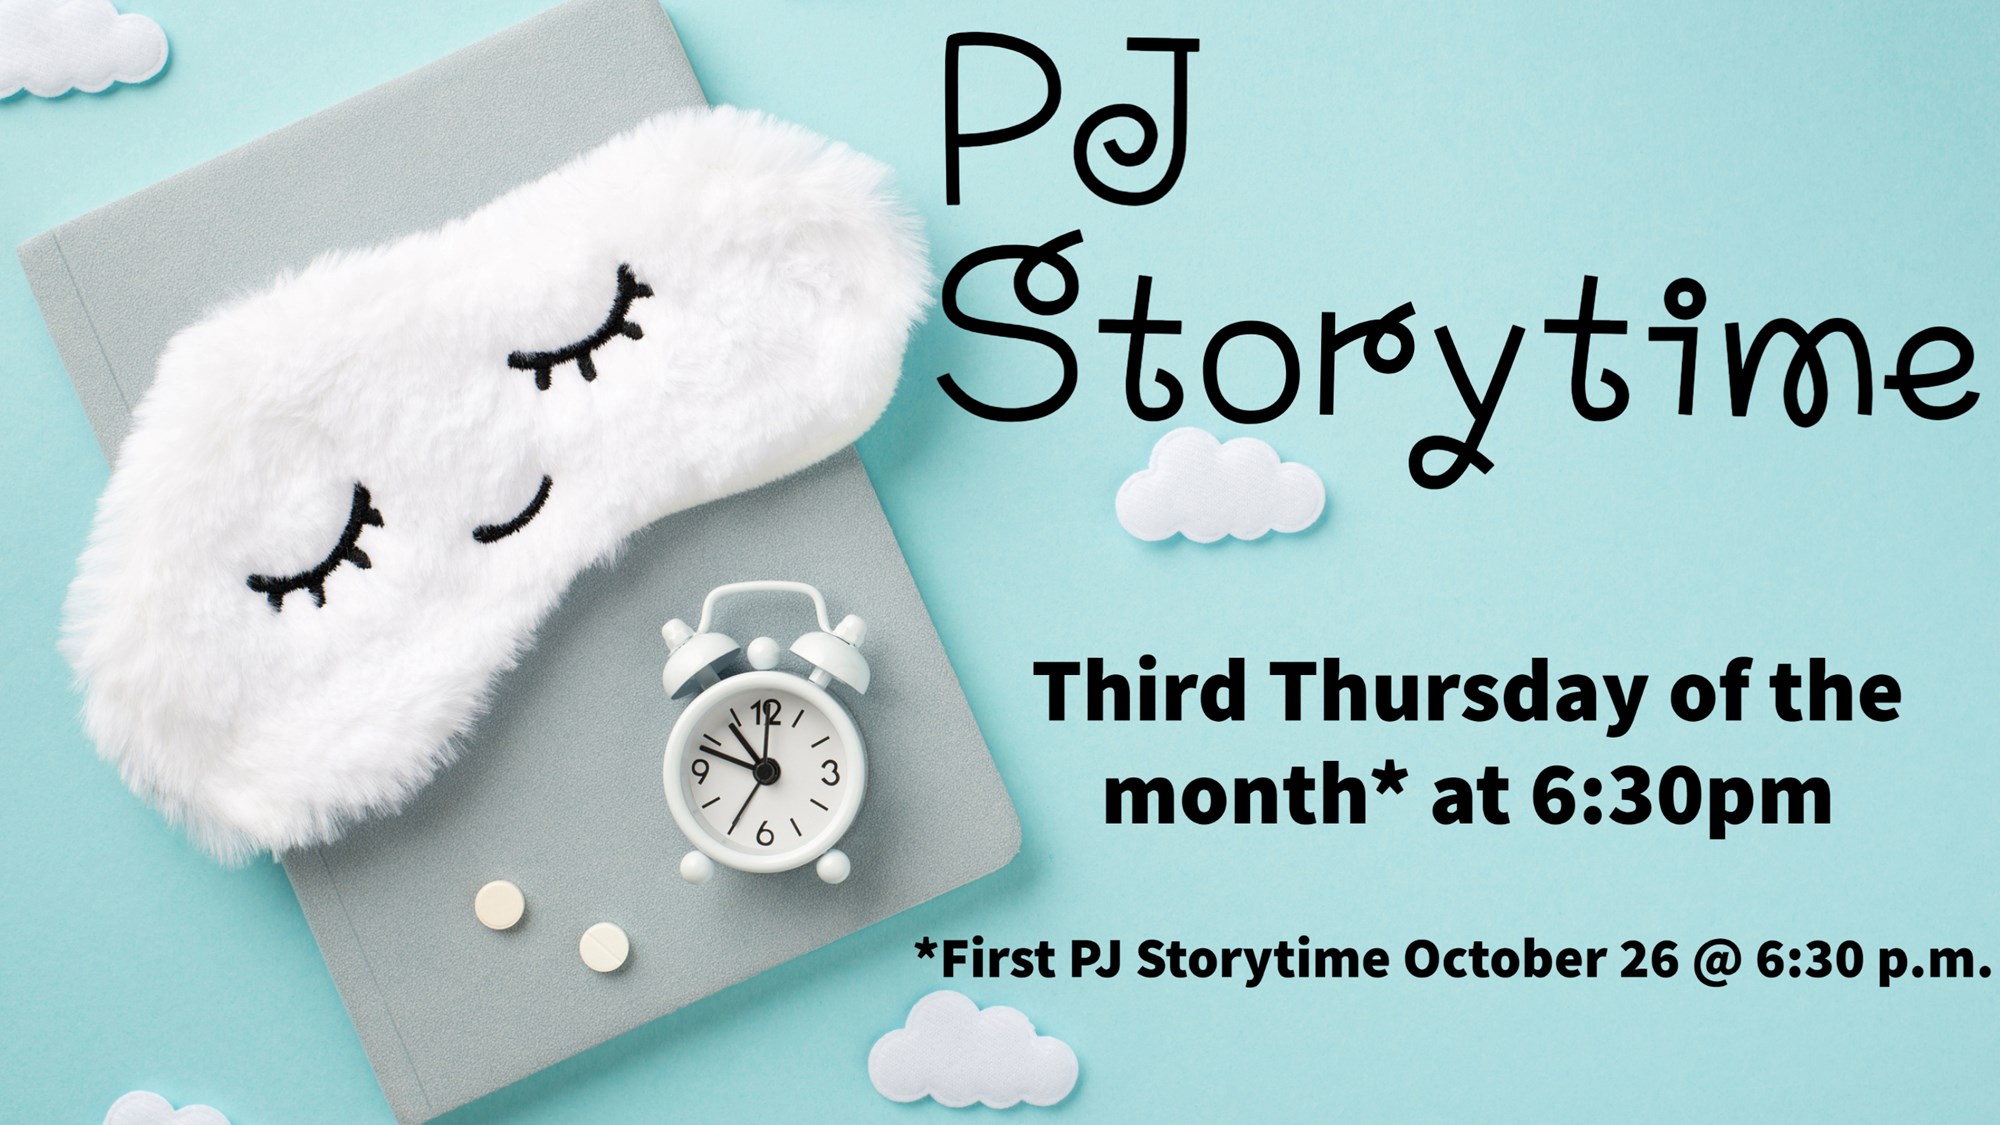 PJ Storytime Third Thursday of the month at 6:30 pm